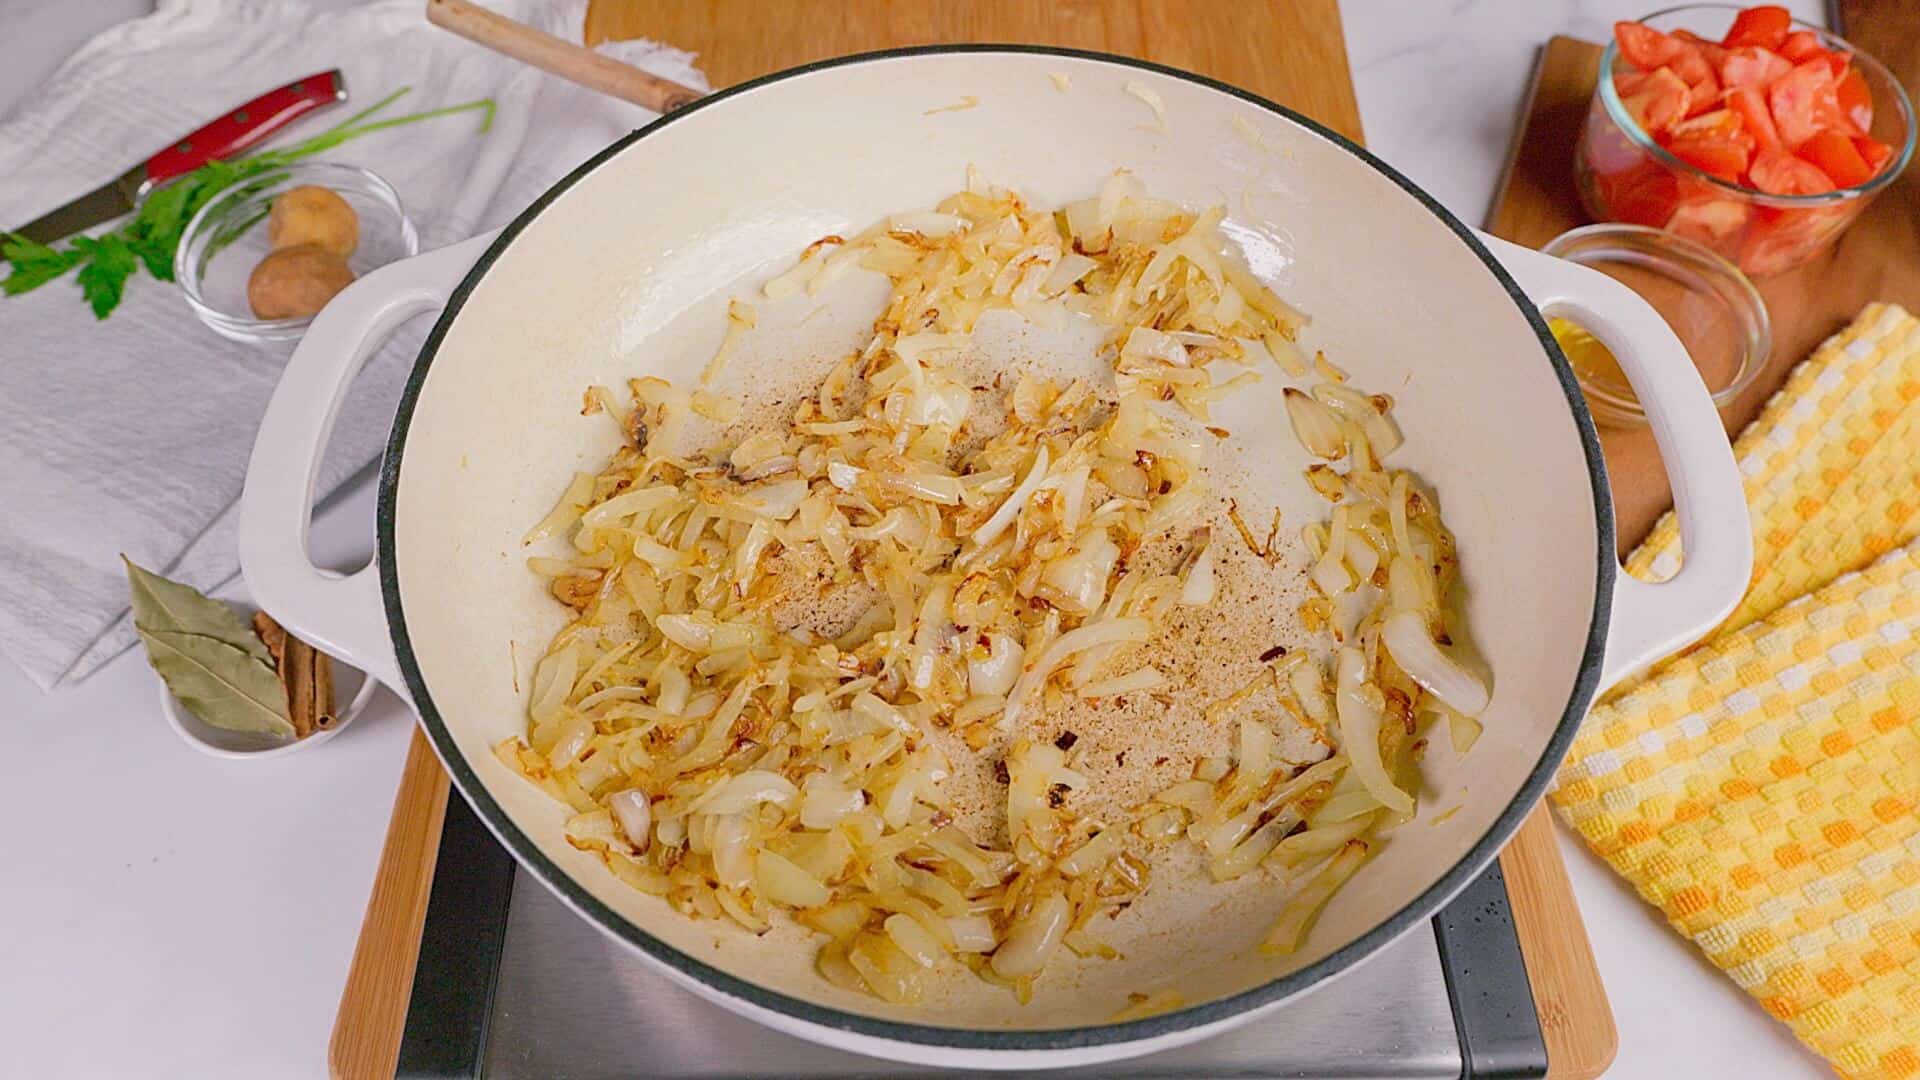 Sauteeing onions for the recipe.